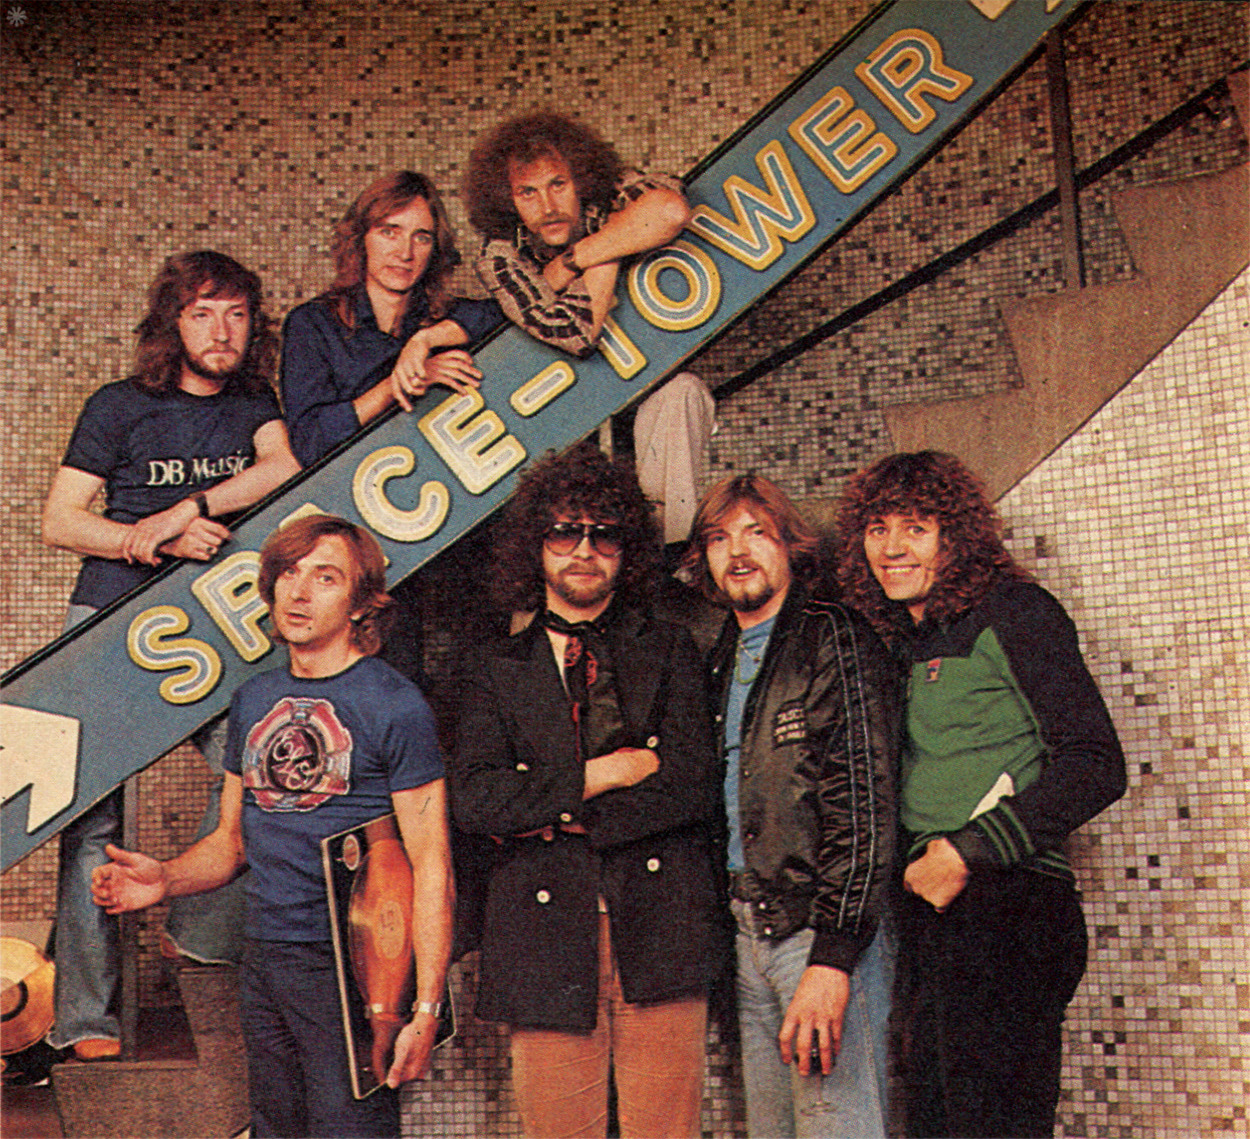 electric light orchestra experience